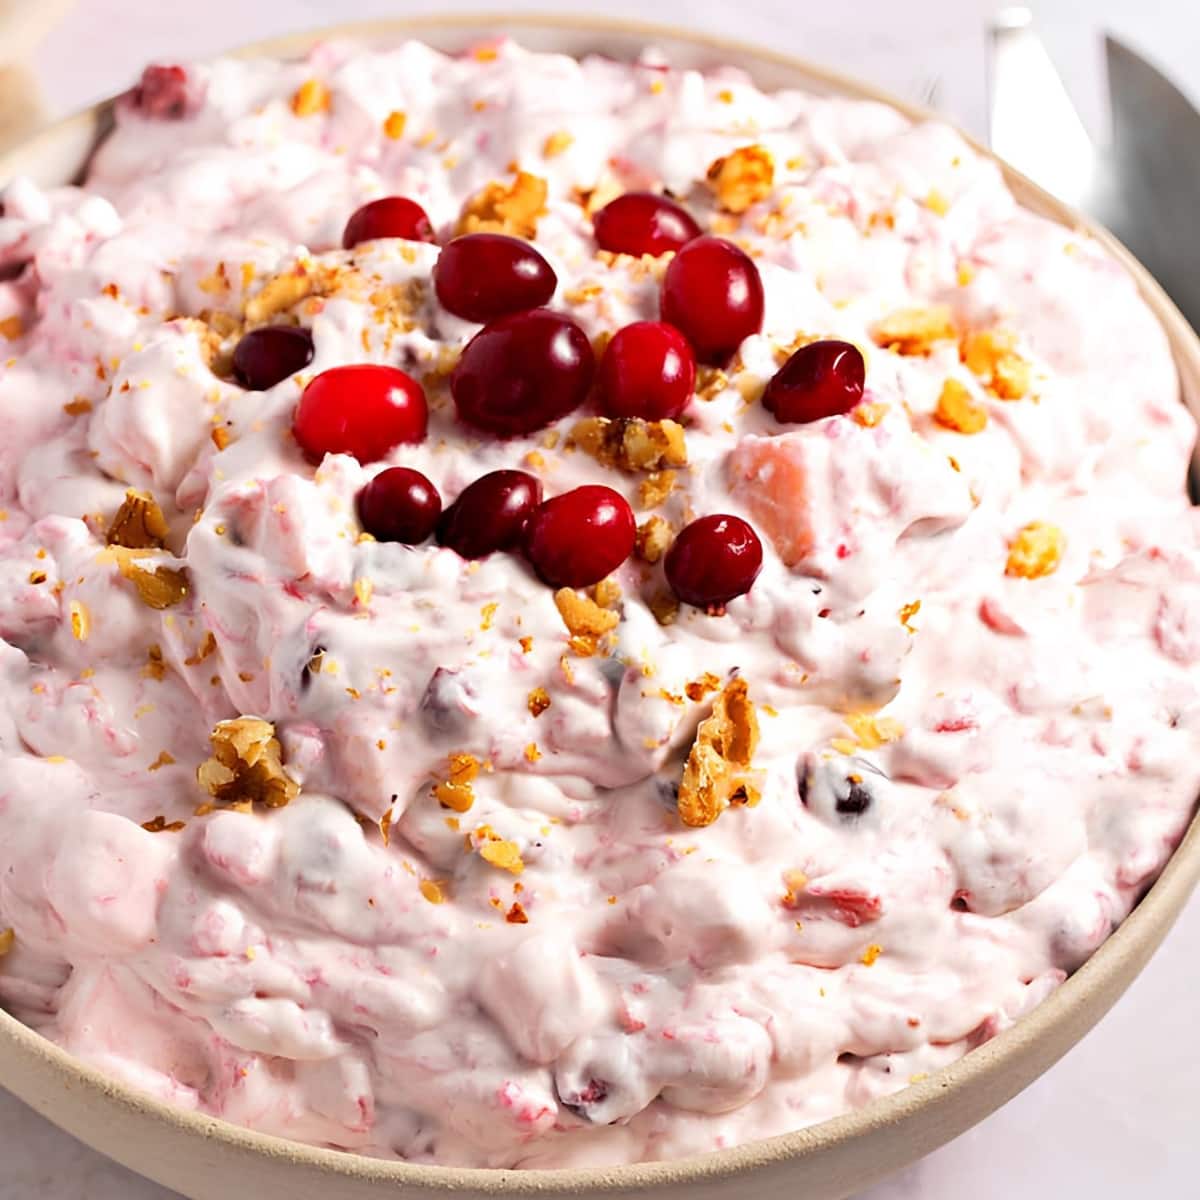 Top view of a bowl of creamy salad with walnuts and cranberries on top.